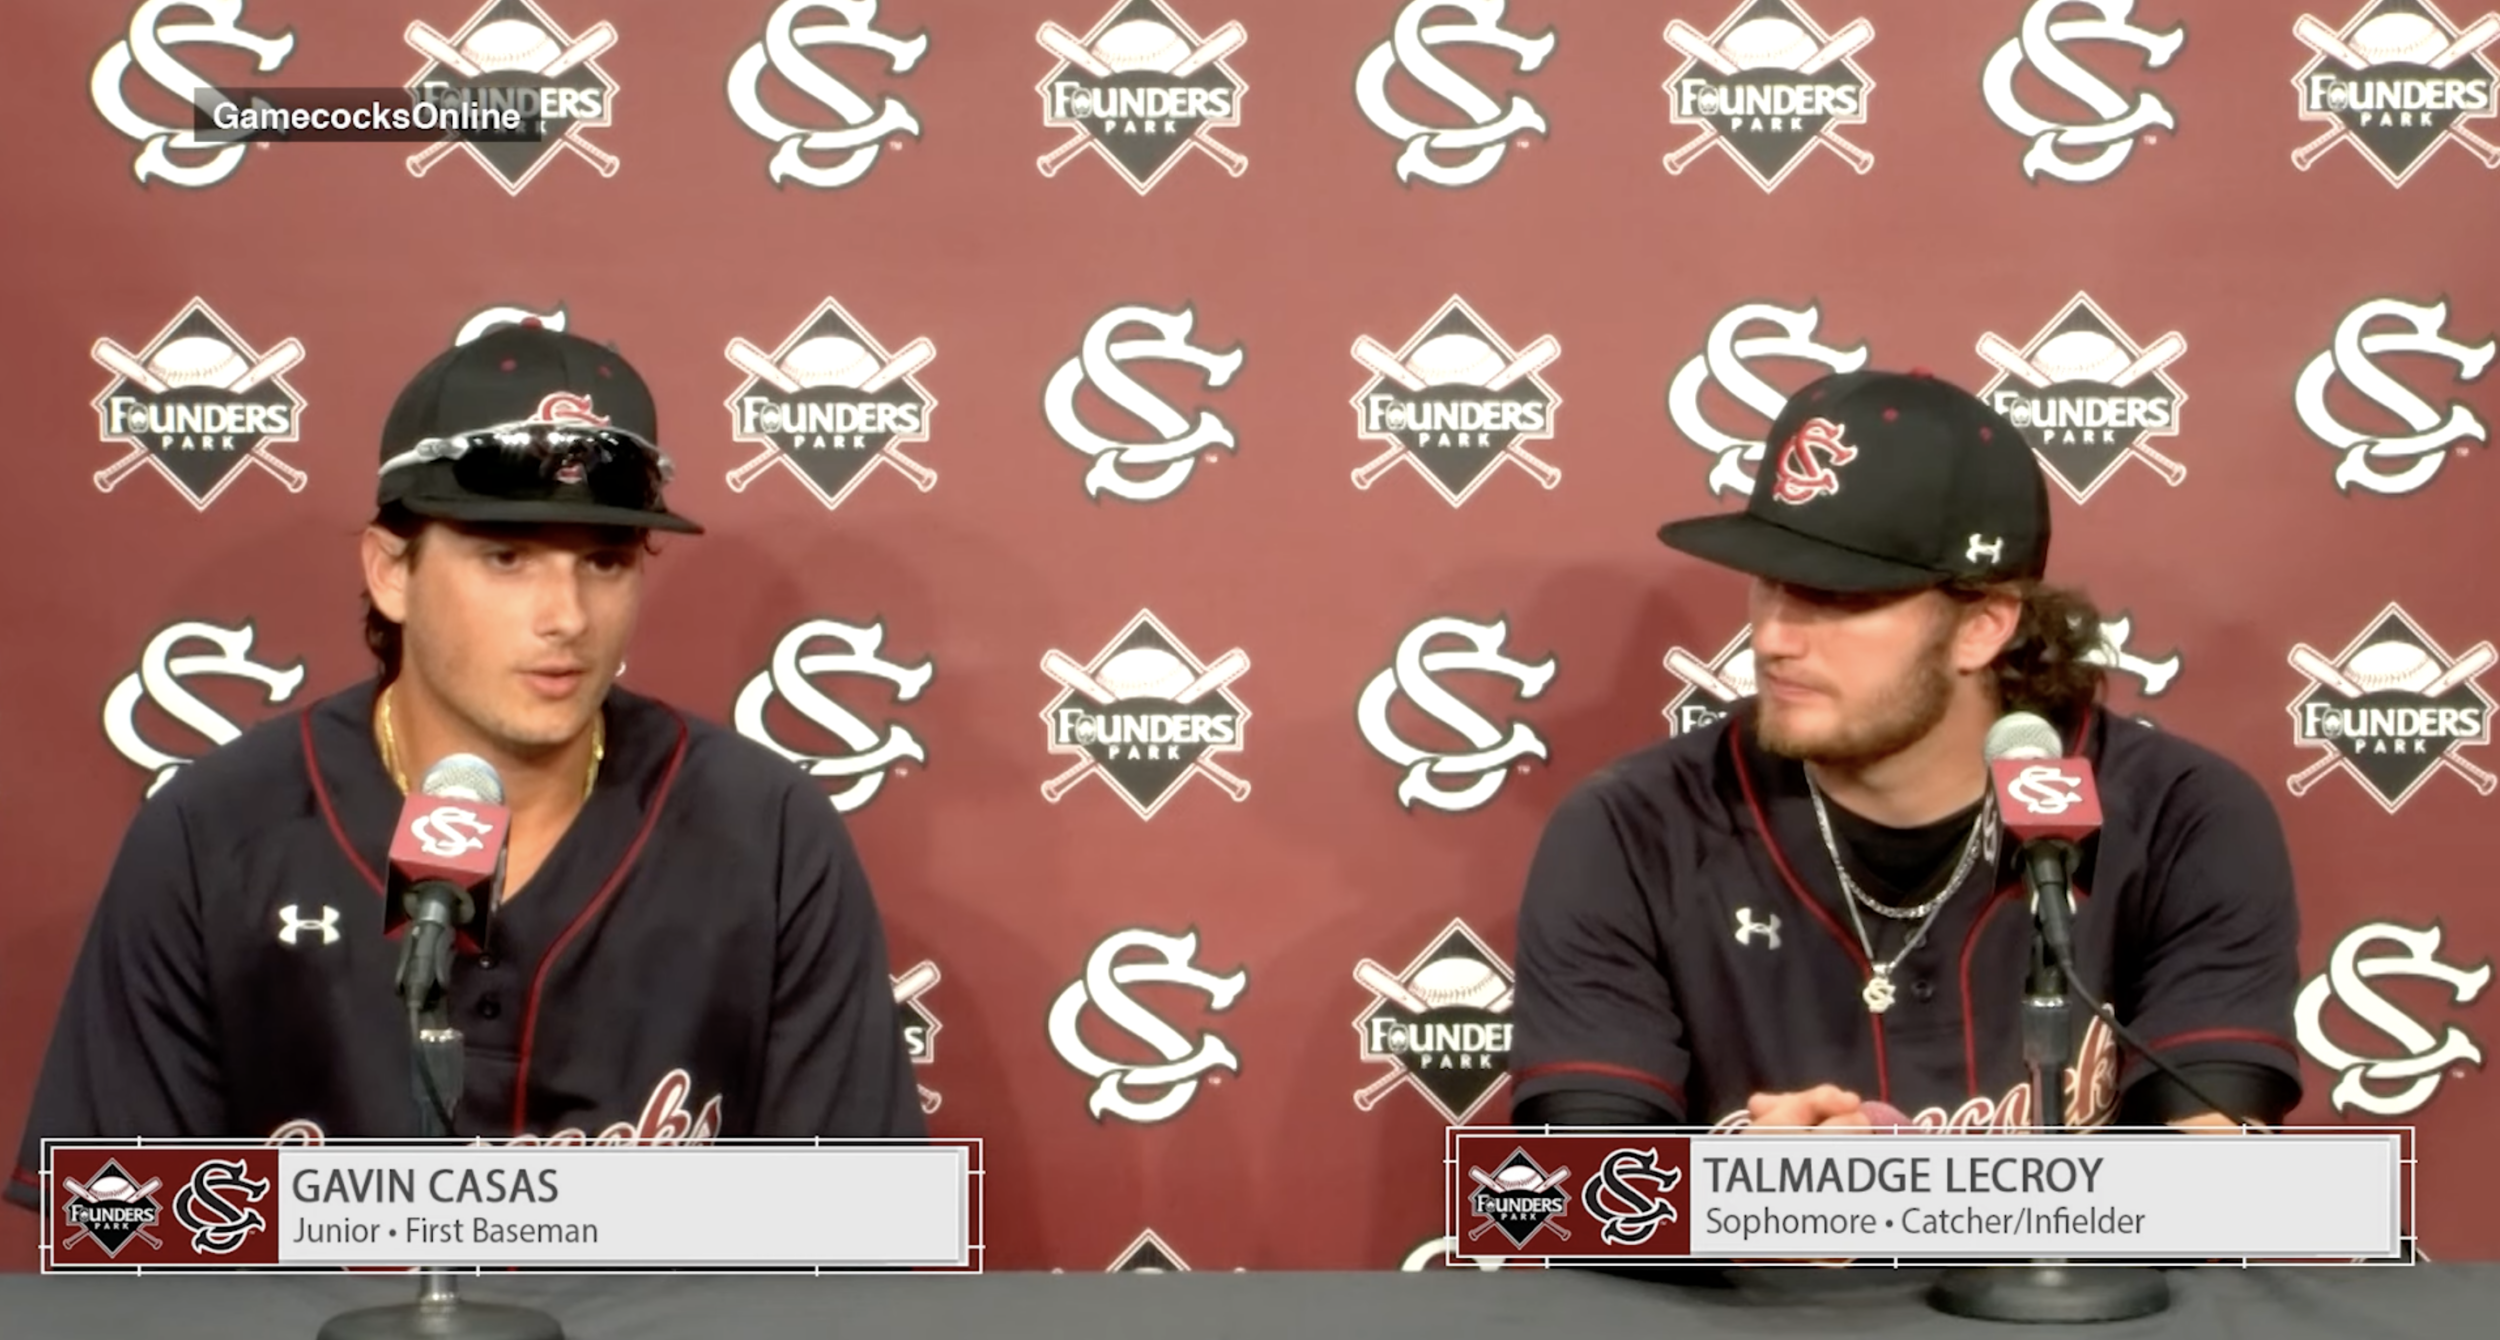 PostGame: (Clemson) - Gavin Casas and Talmadge LeCroy News Conference